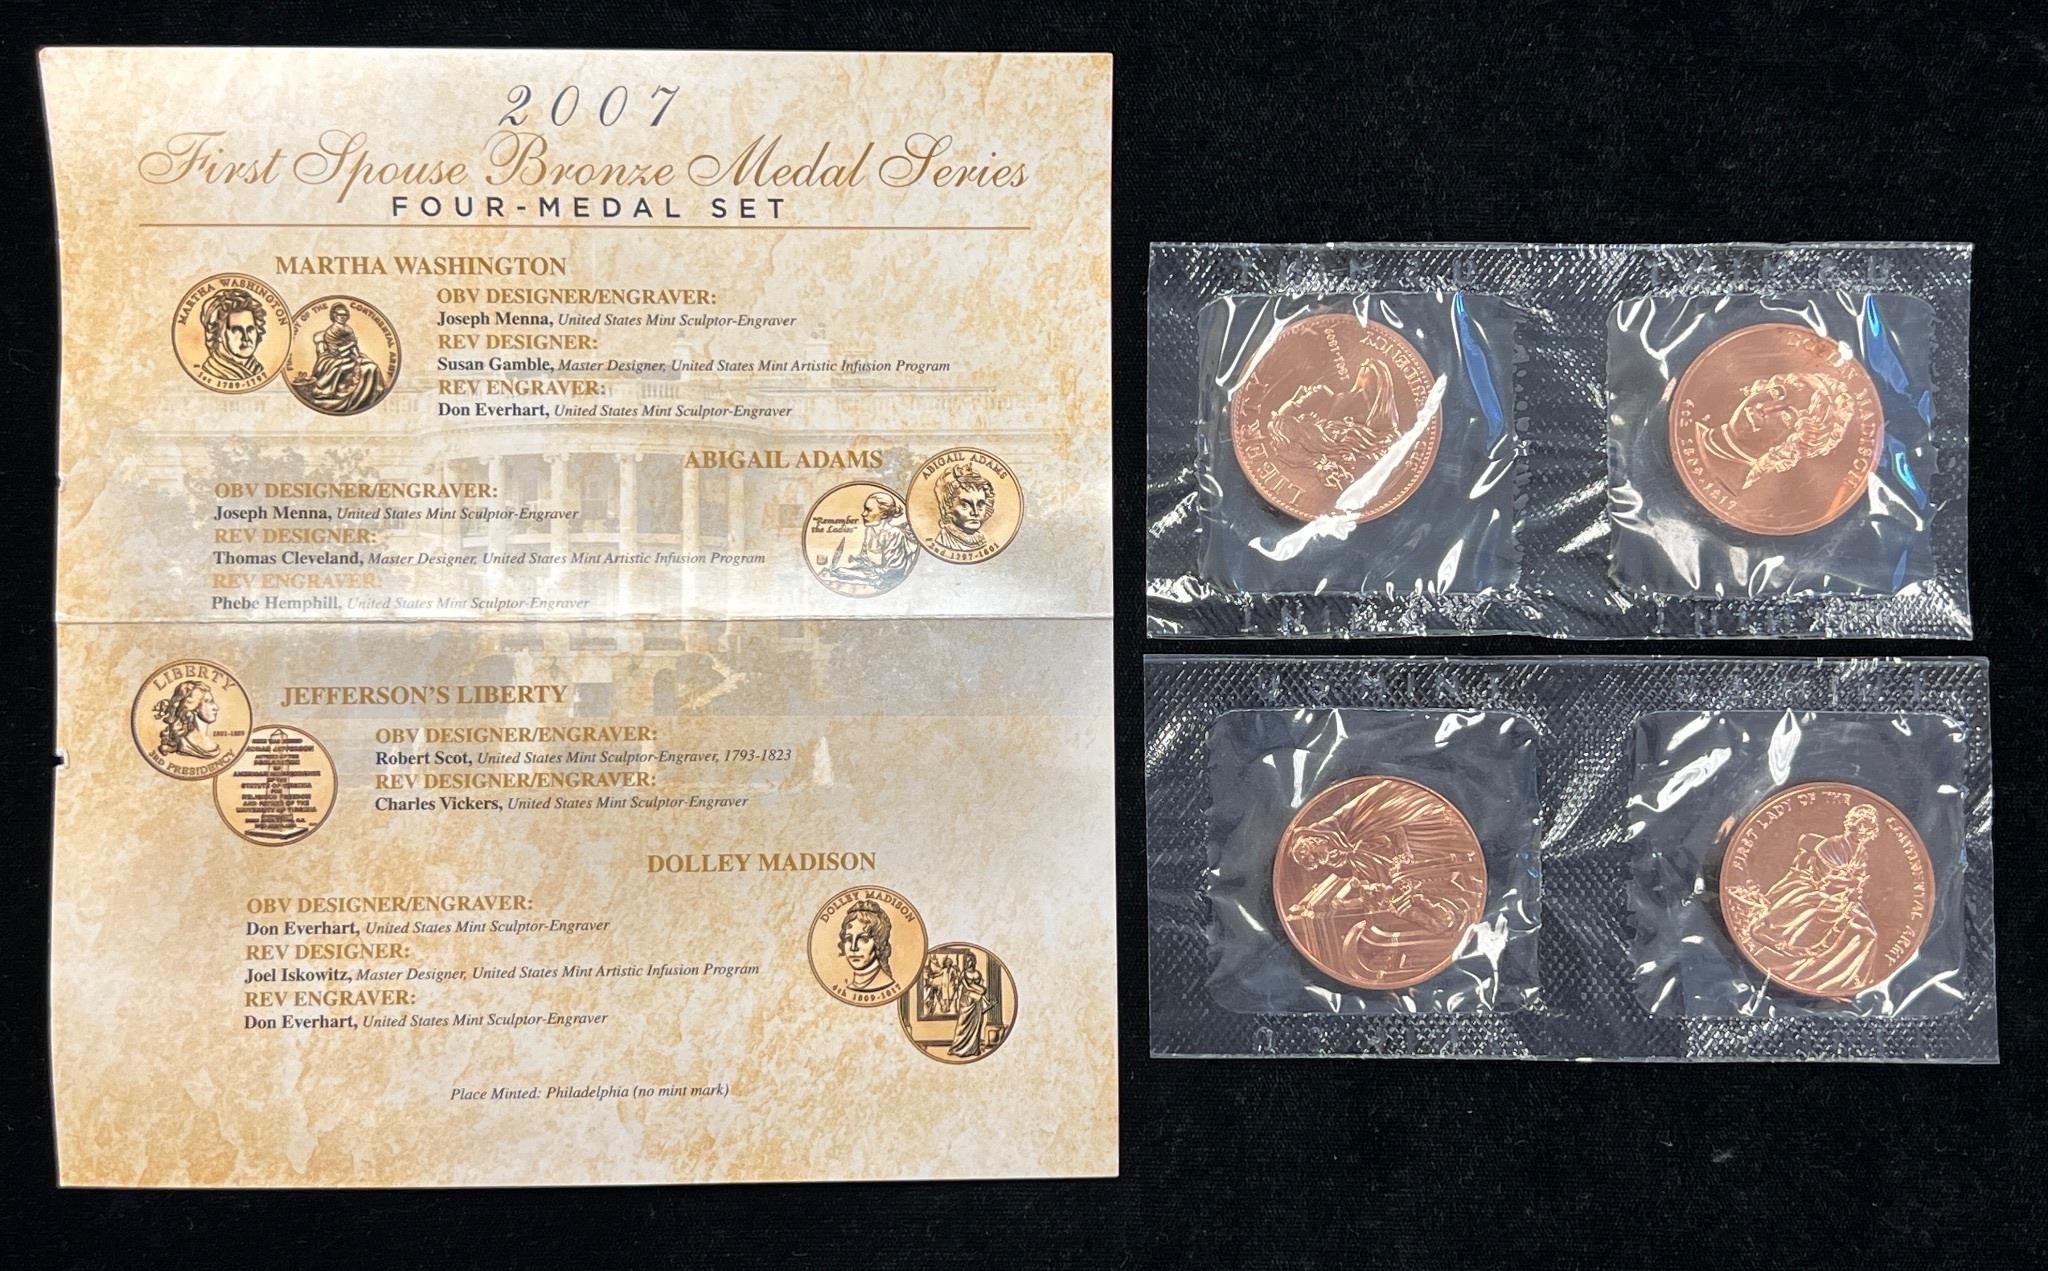 2007 First Spouse Bronze Medal Series